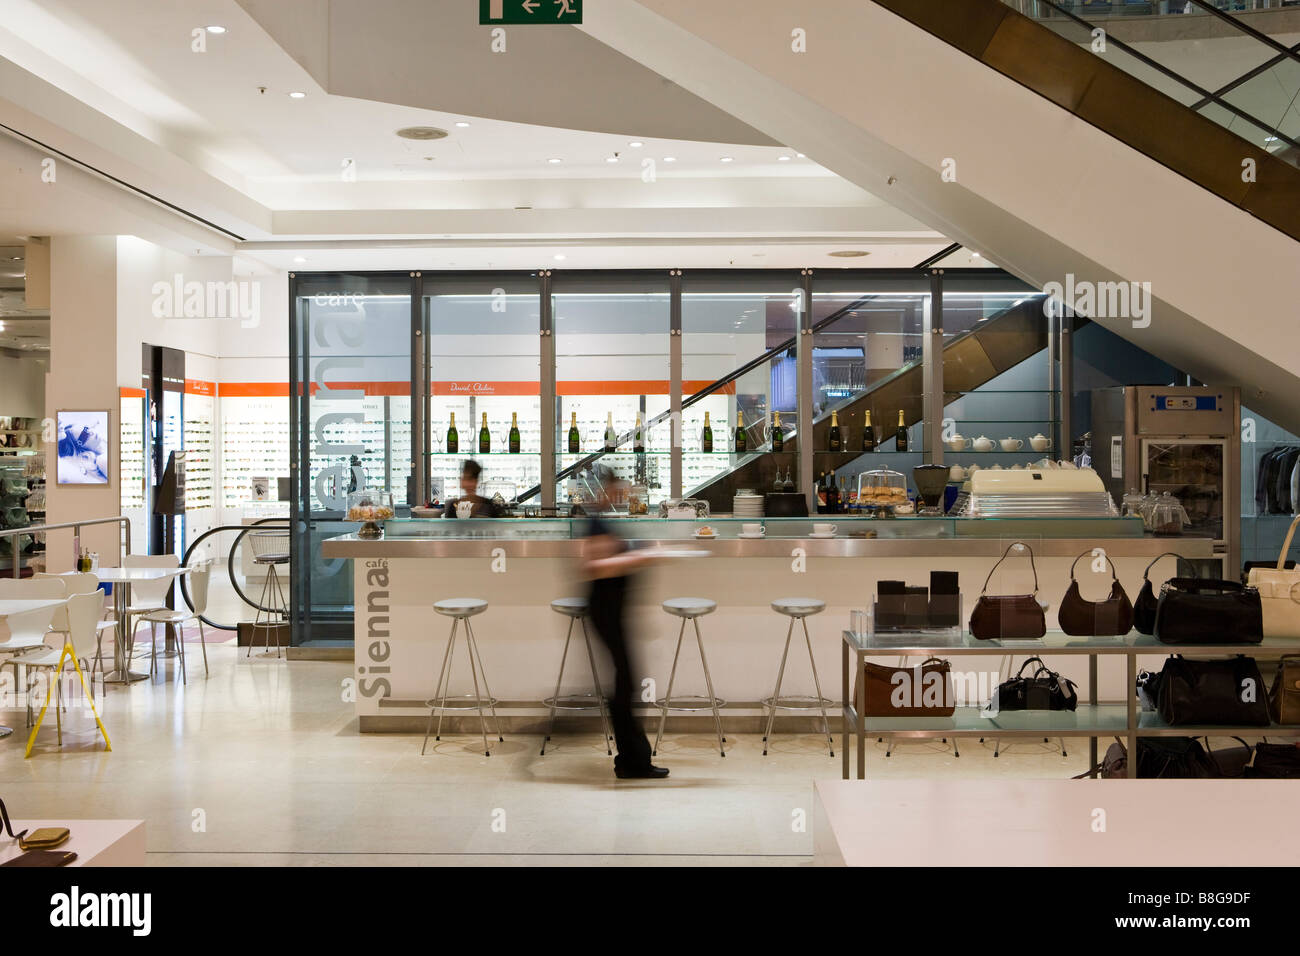 Cafe selfridges hi-res stock photography and images - Alamy